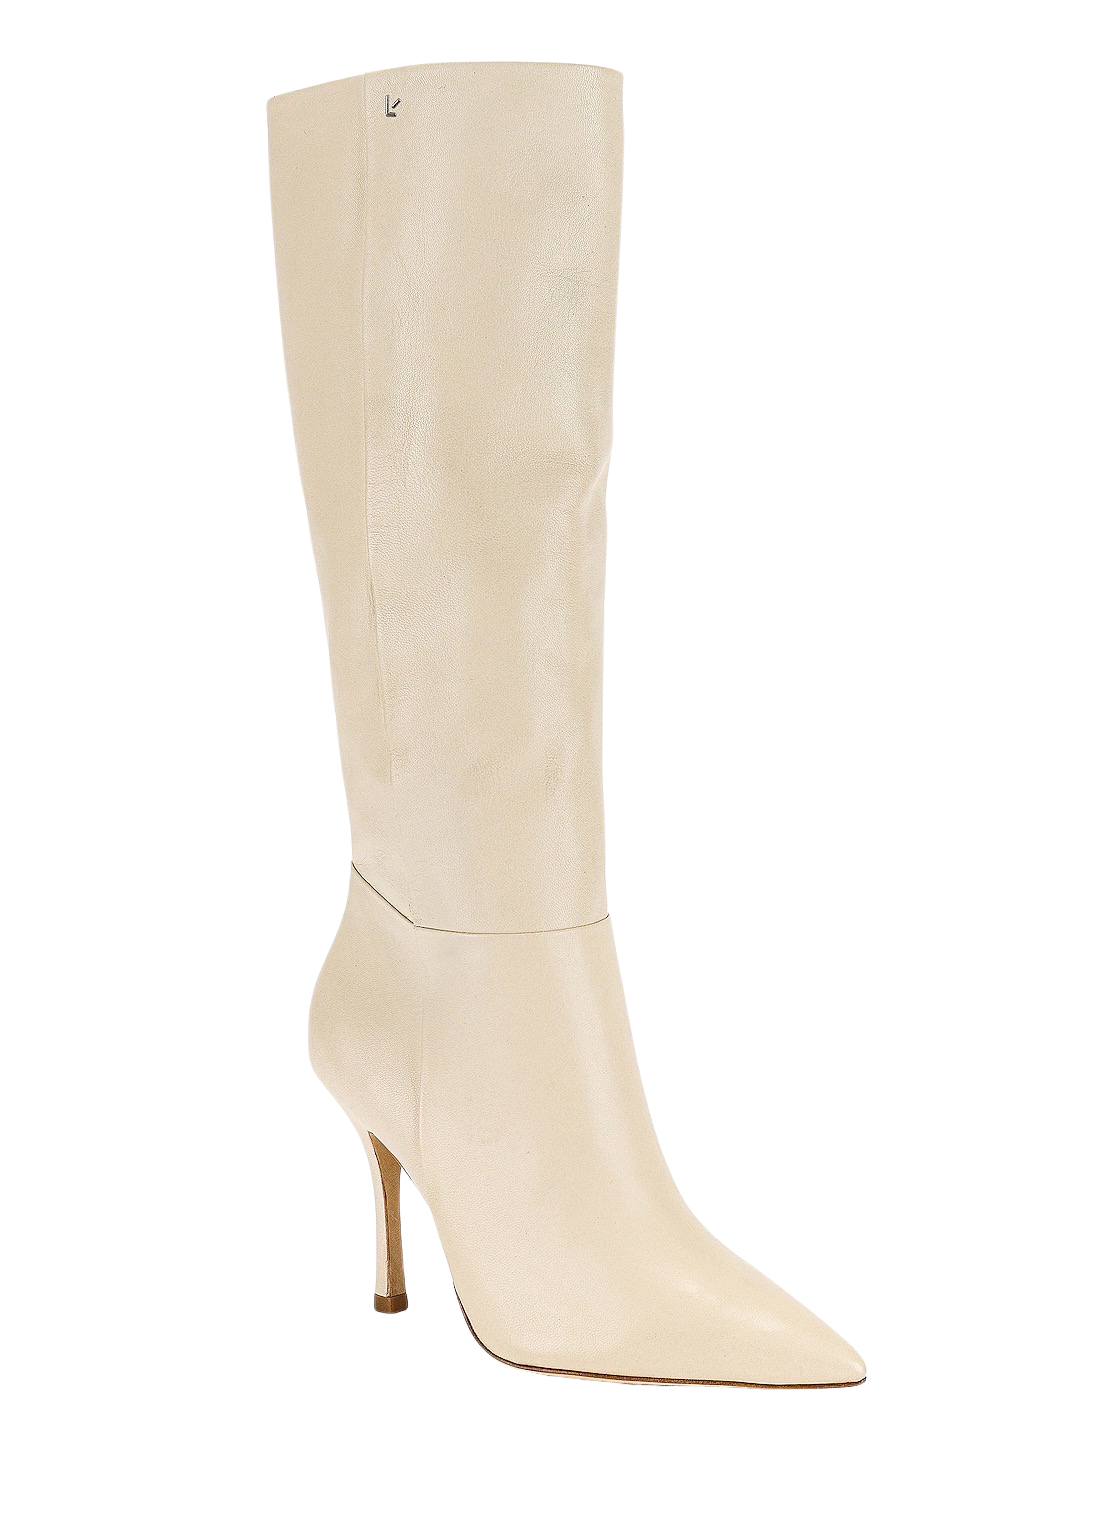 The Kate Boot